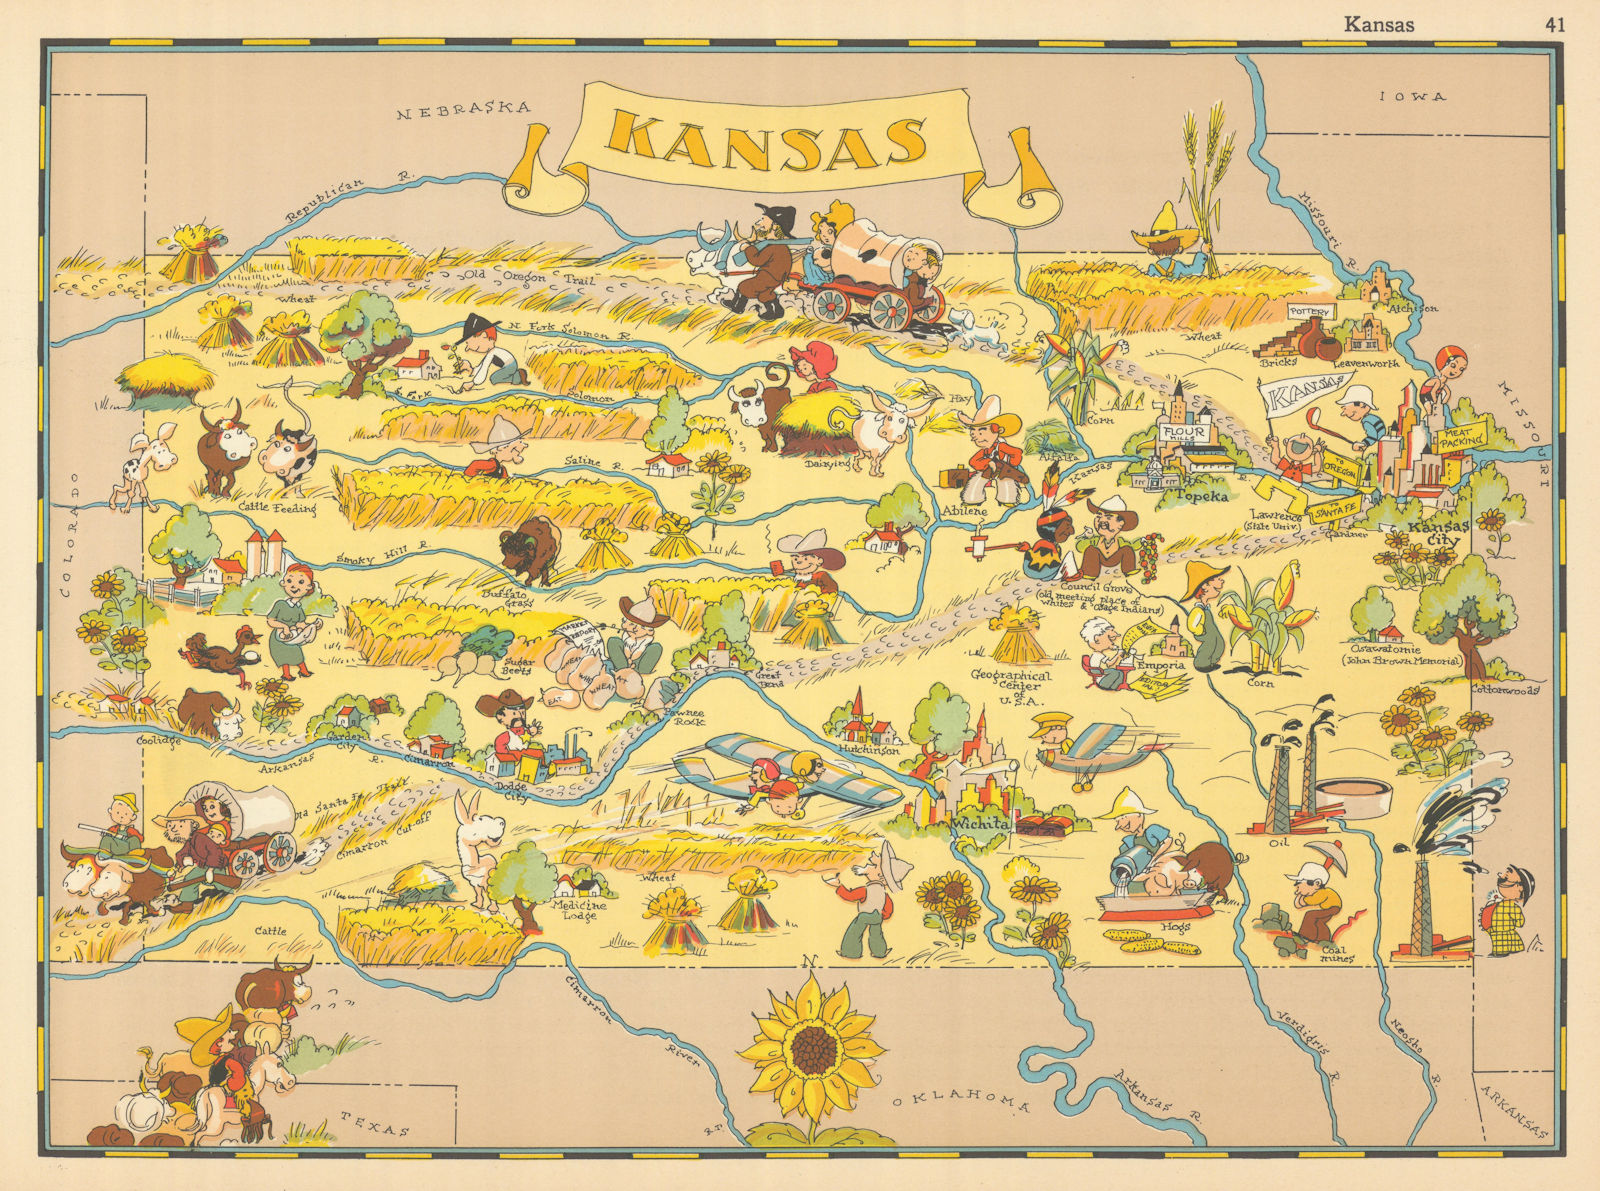 Associate Product Kansas. Pictorial state map by Ruth Taylor White 1935 old vintage chart